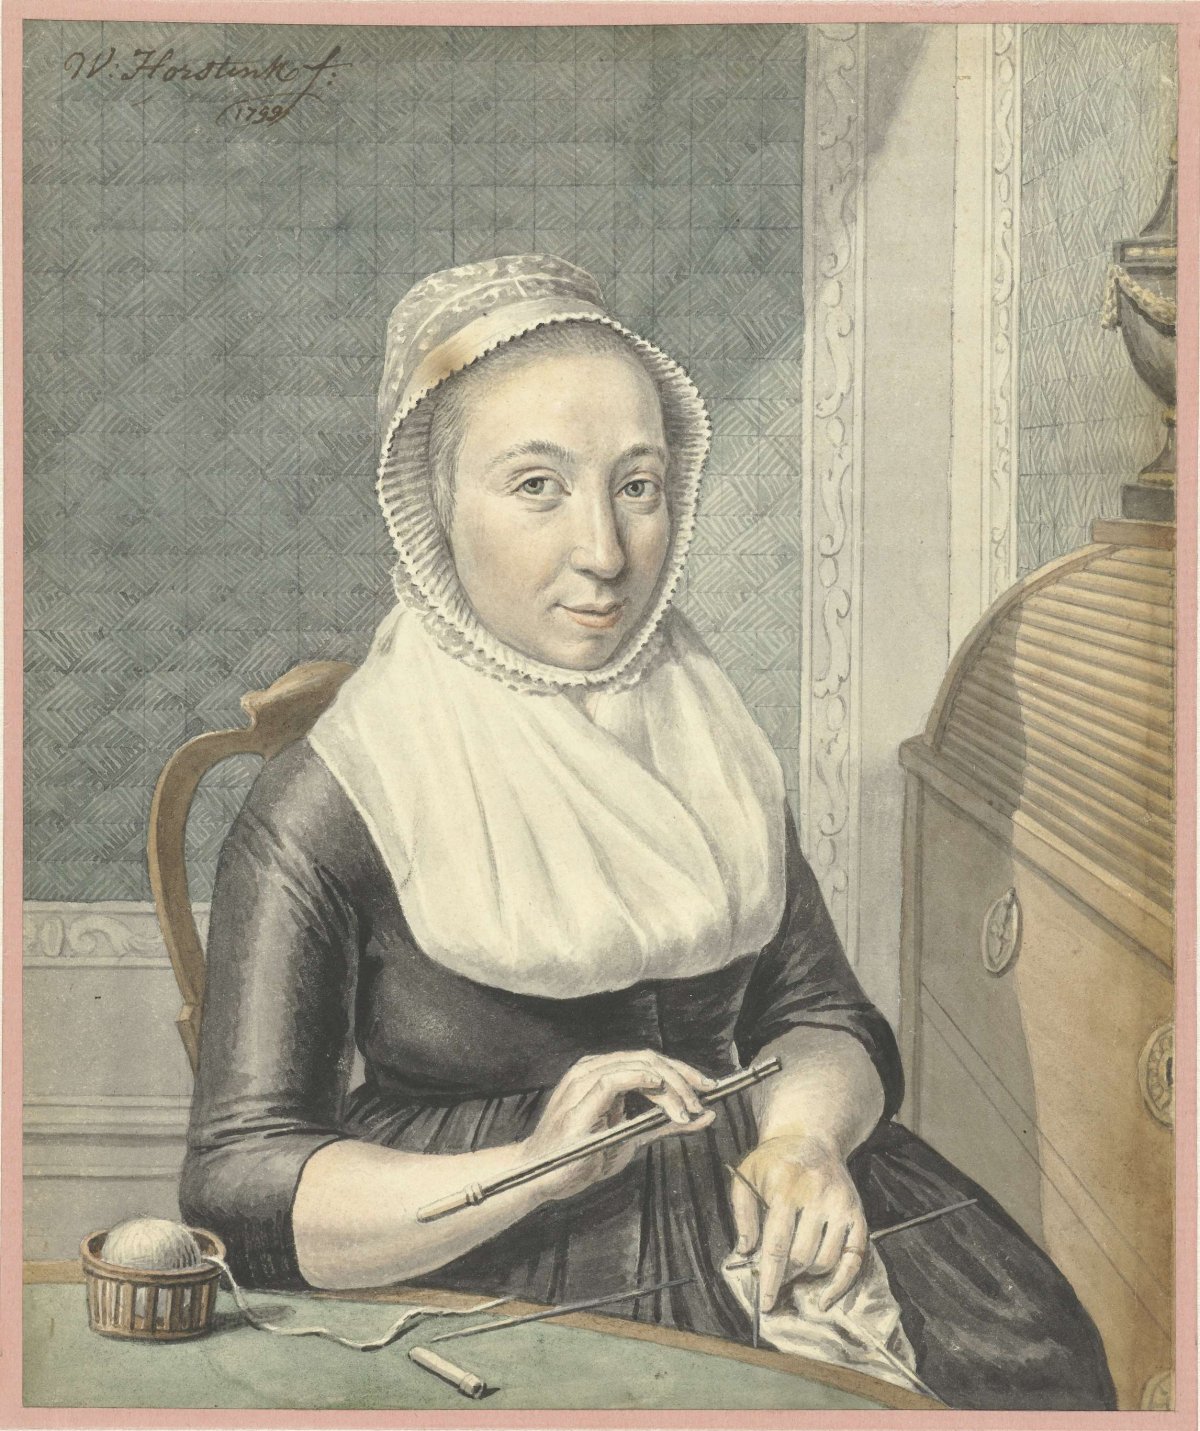 Portrait of a lady with knitting, Warner Horstink, 1799